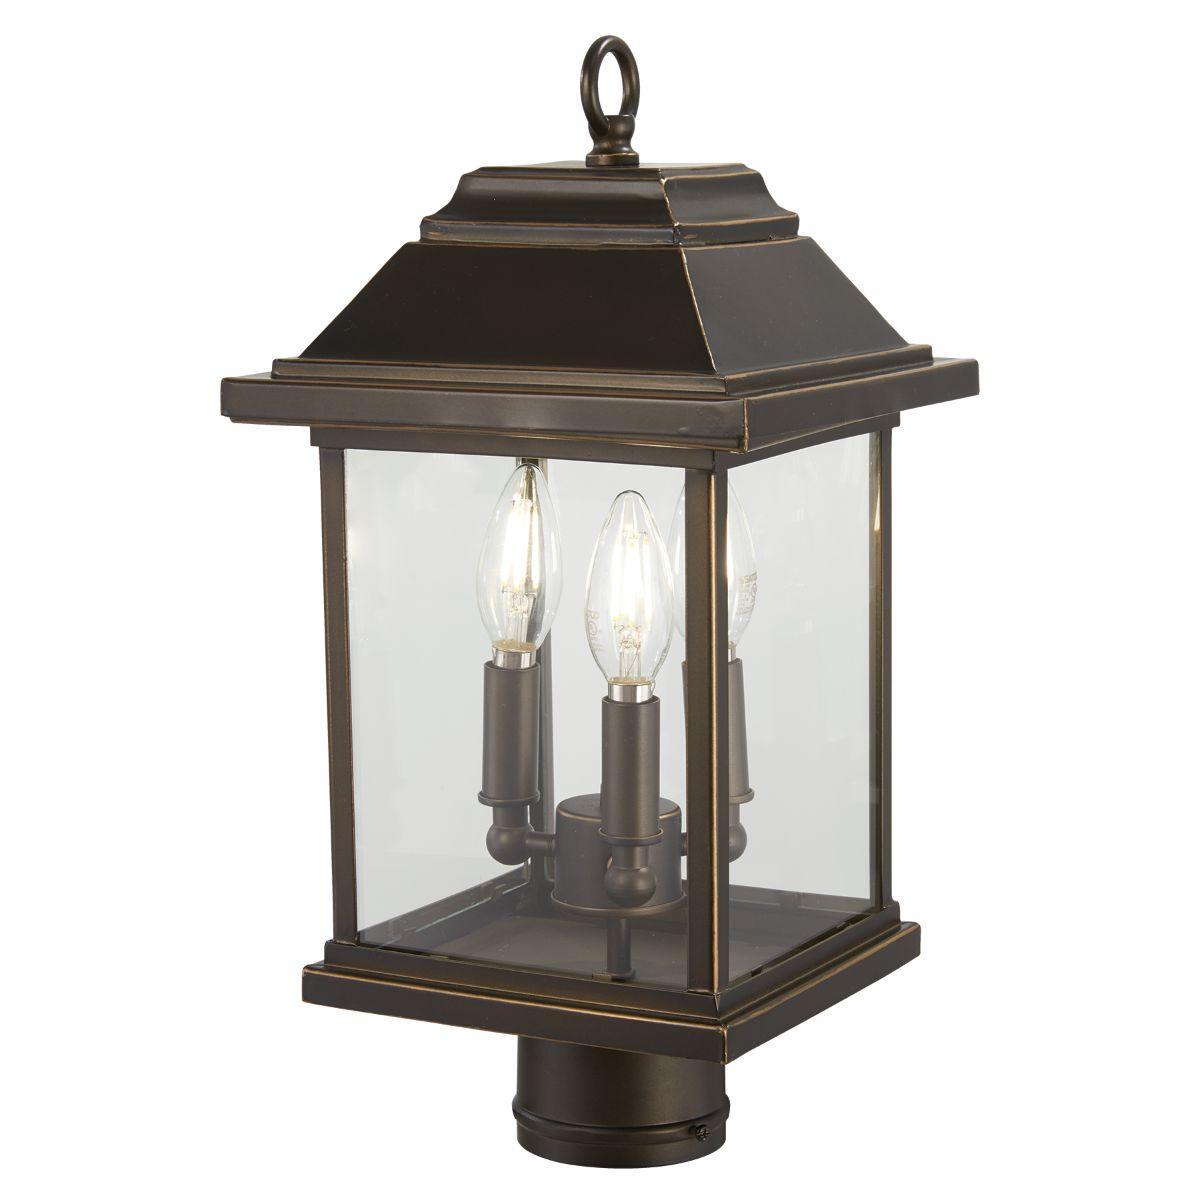 Mariner's Pointe 17 in. 3 lights Lantern Head Oil Rubbed Bronze & Gold finish